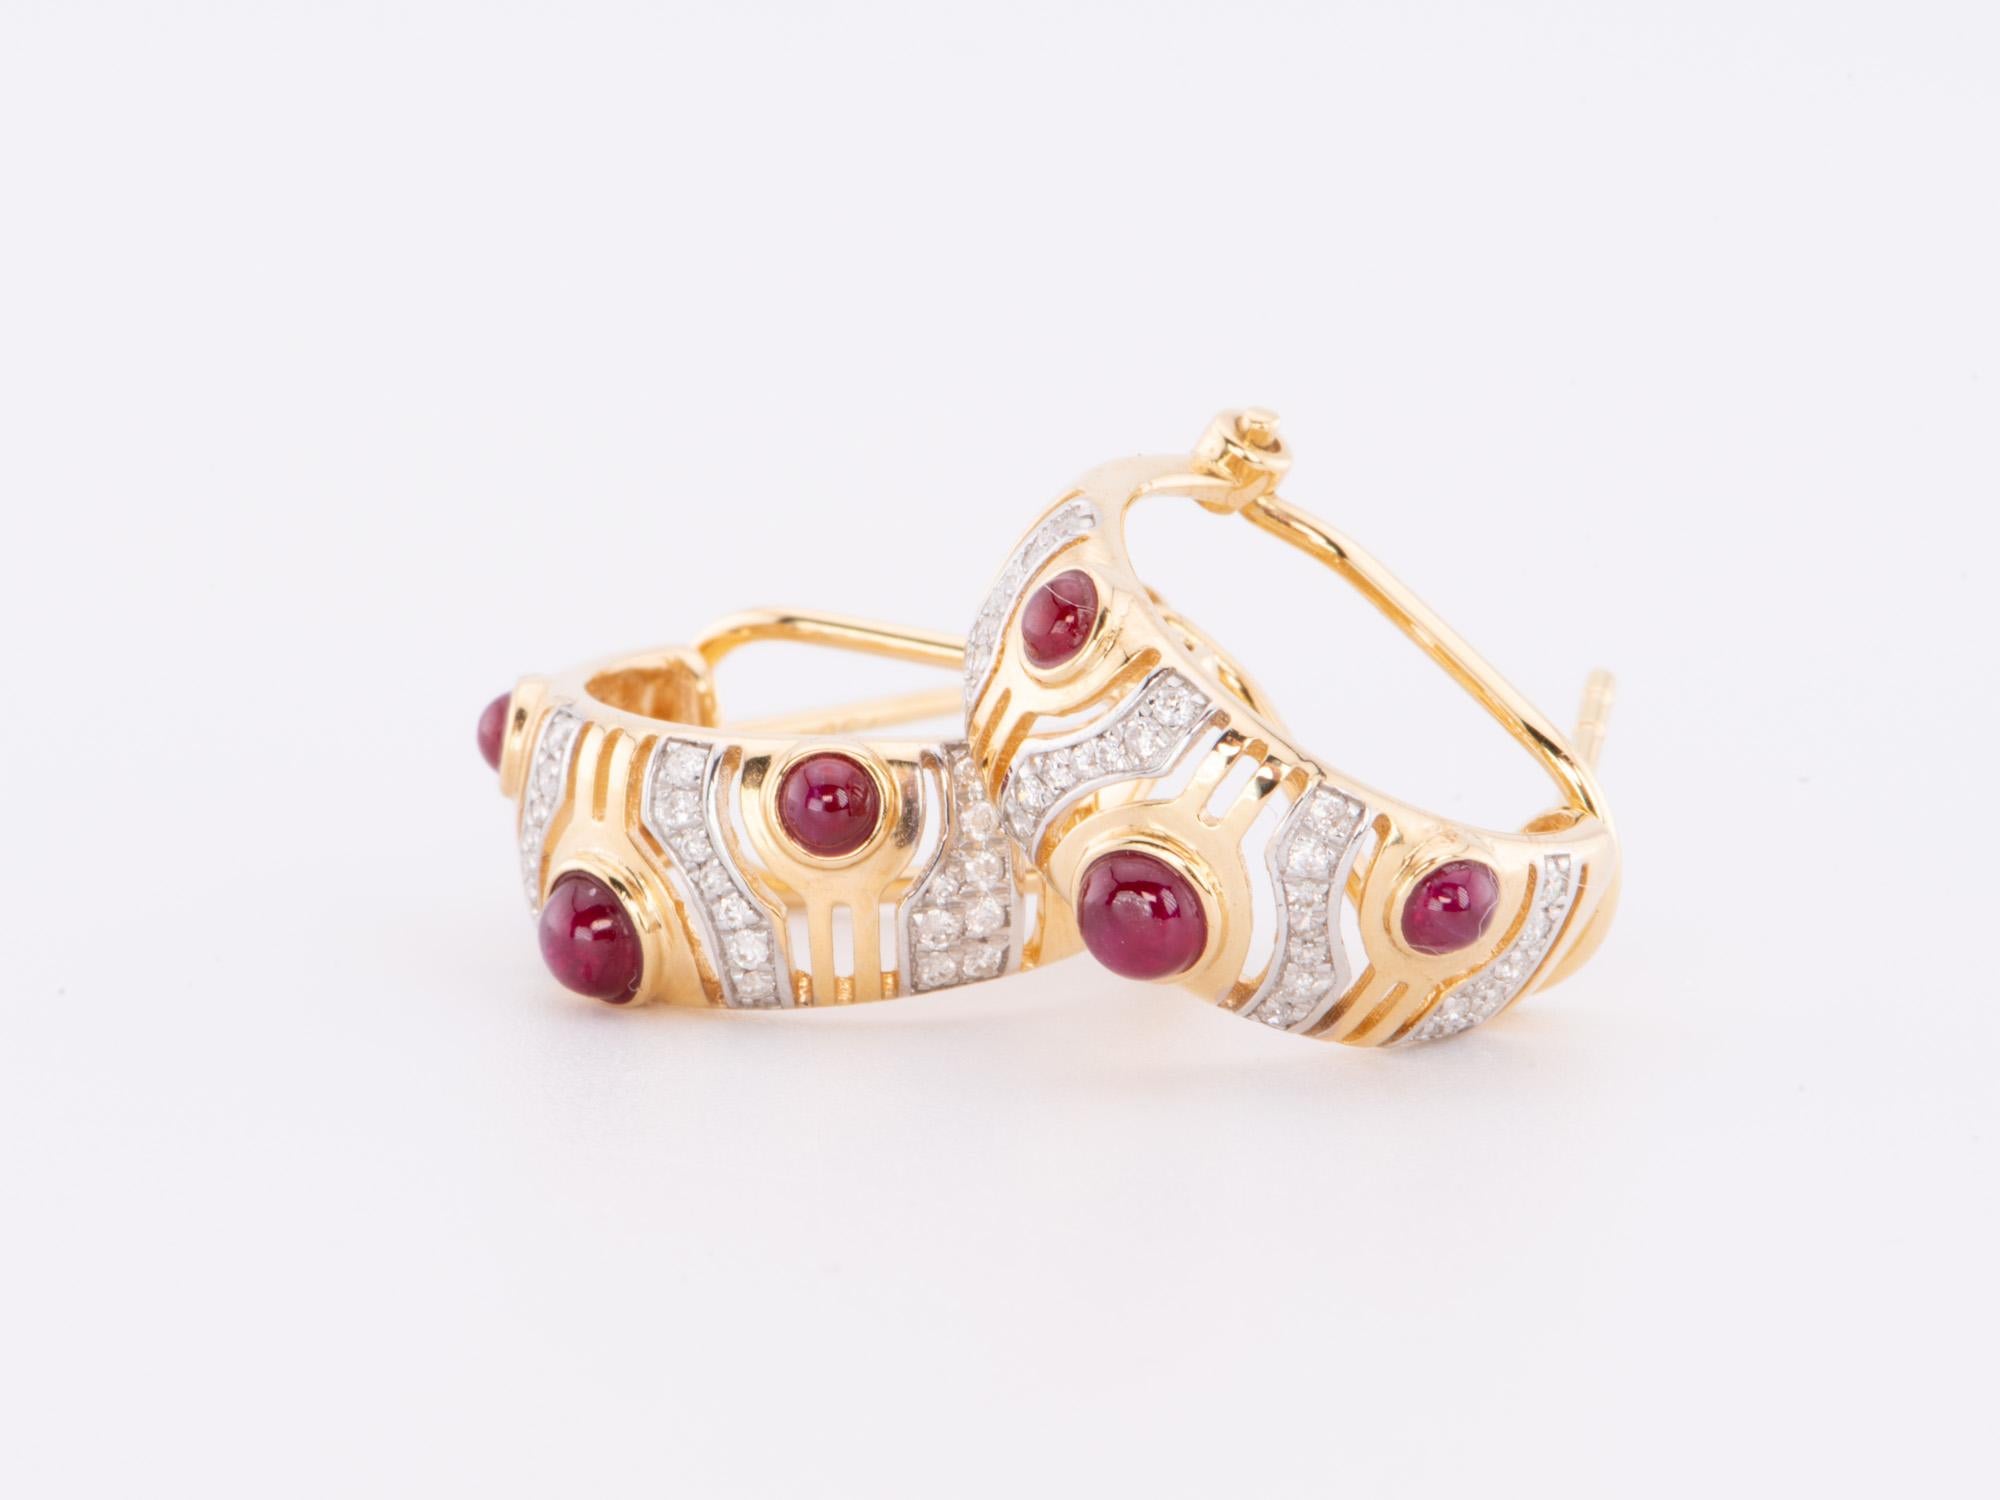 18K Gold Ruby and Diamond Designer Earrings with Omega Clip Backing R3207 In New Condition For Sale In Osprey, FL